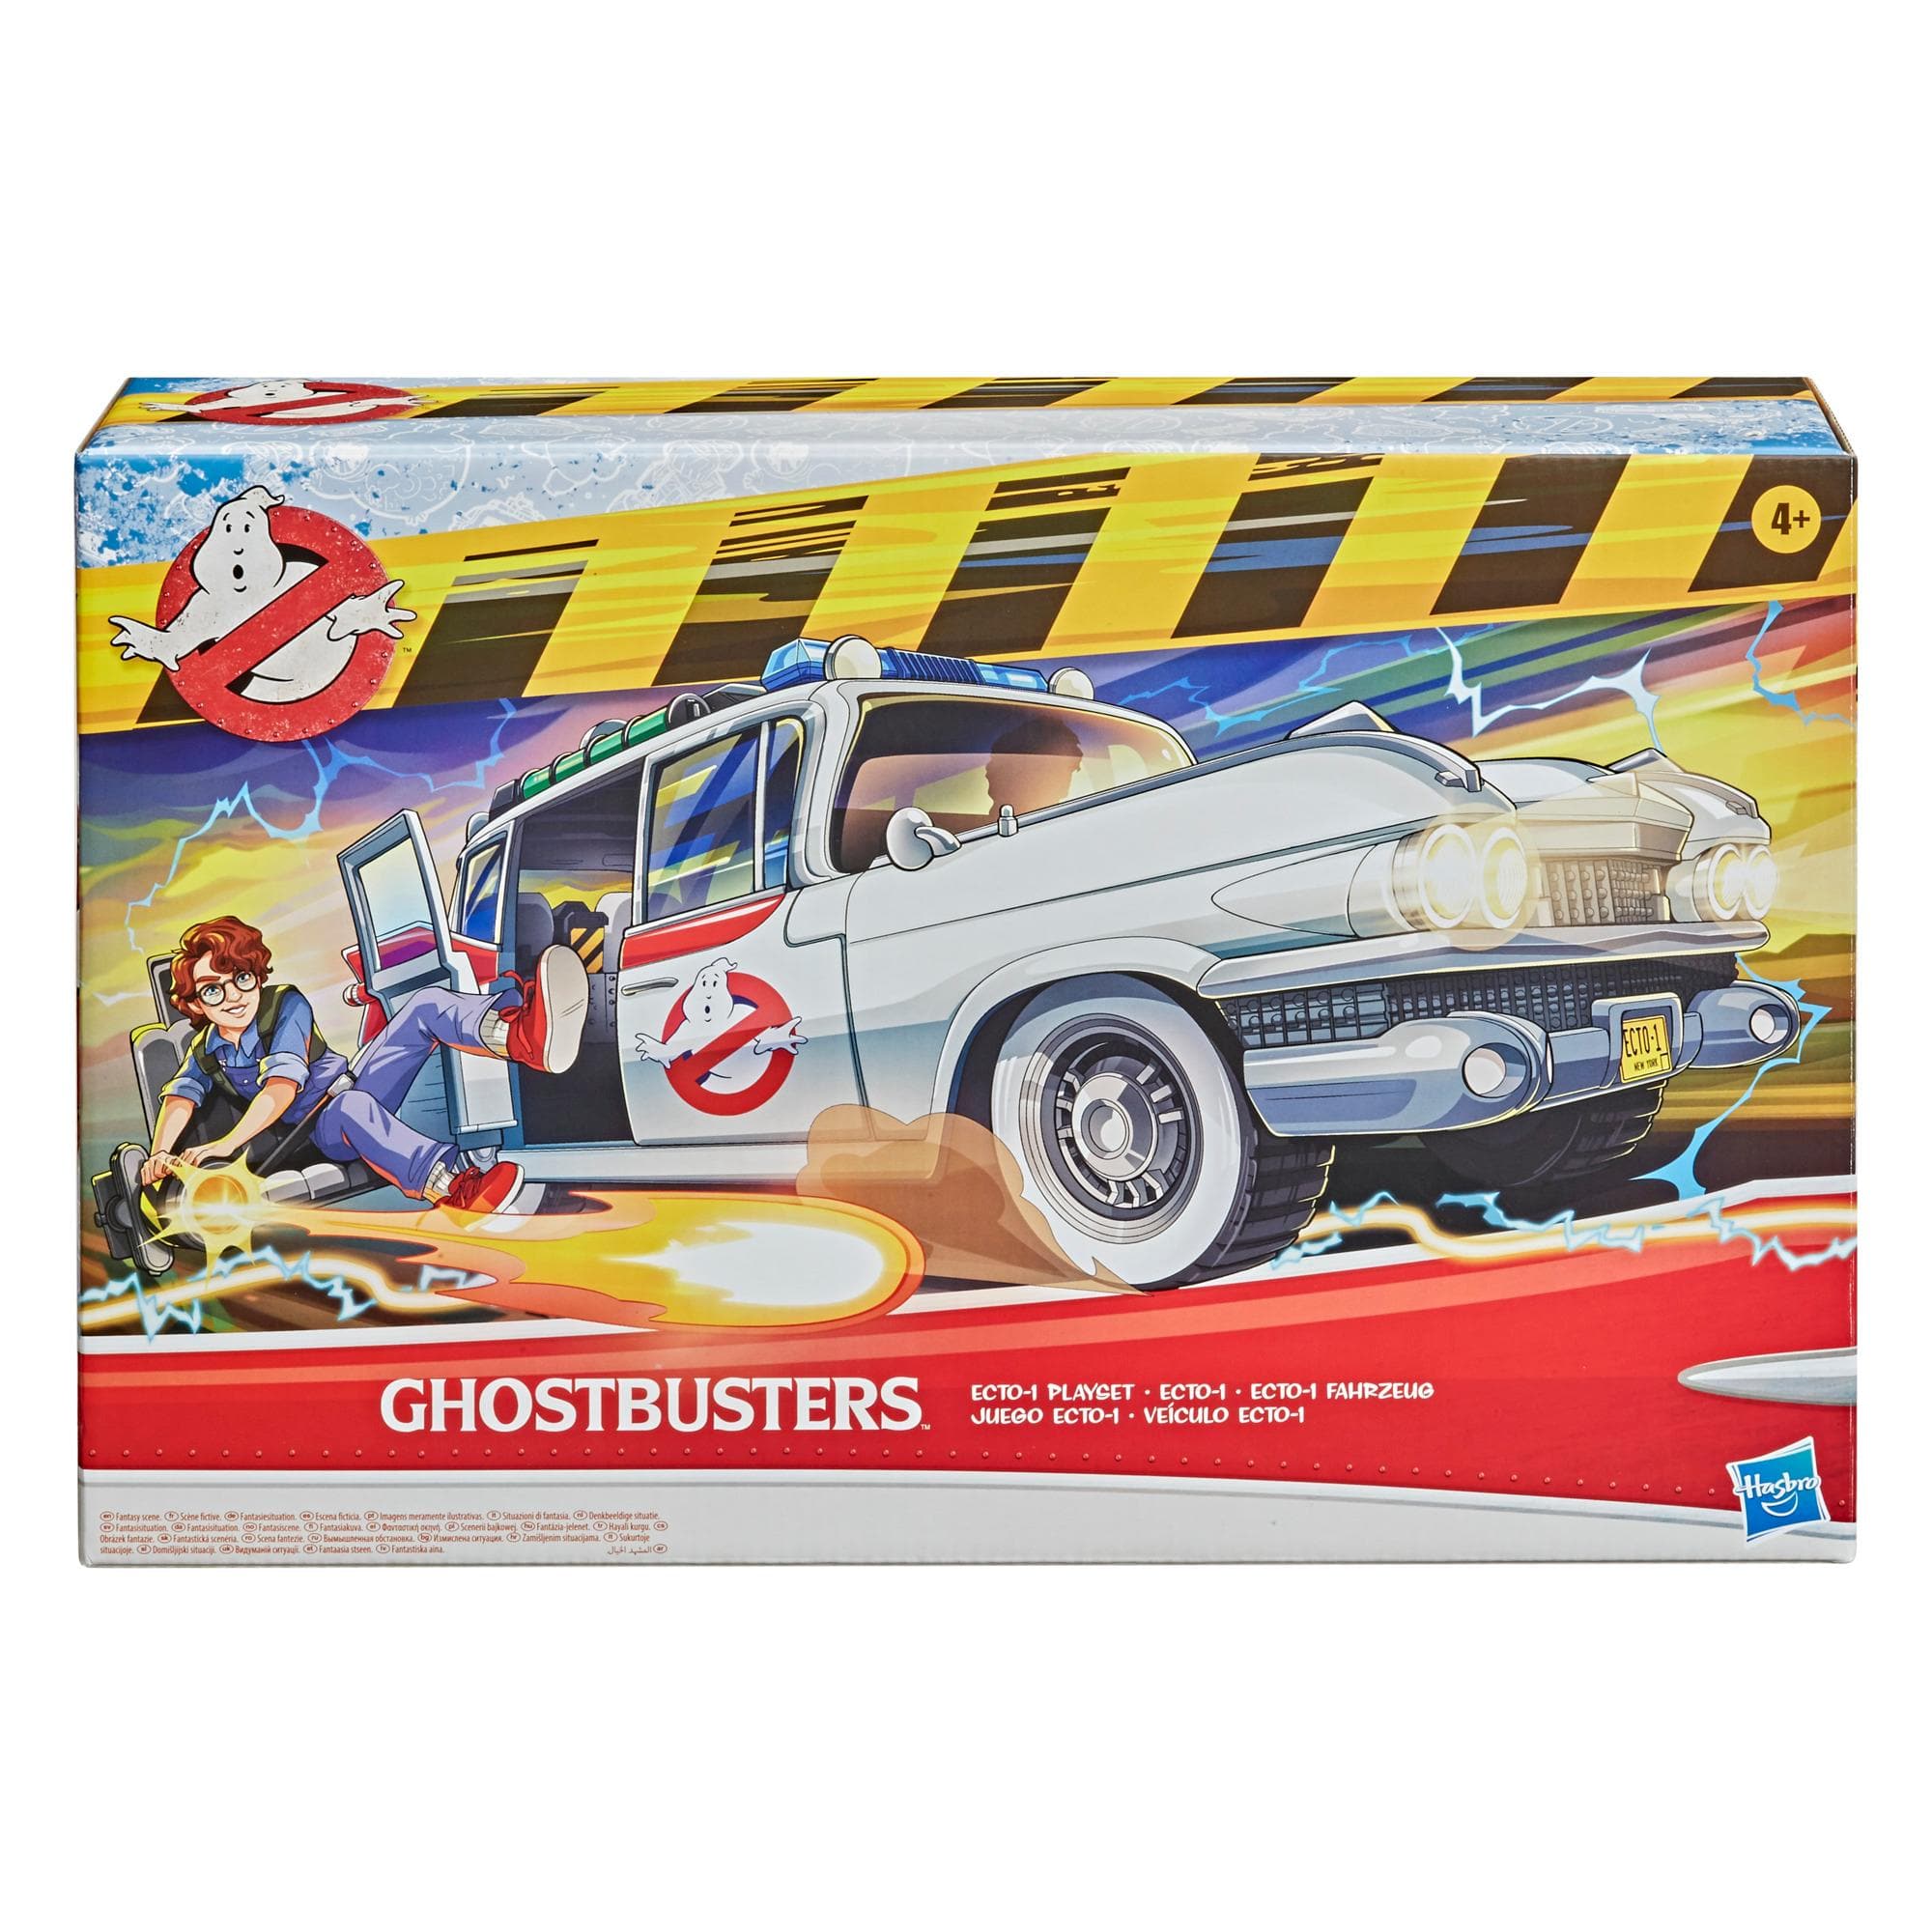 Hasbro-Ghostbusters Movie Ecto-1 Playset with Accessories-E9563-Legacy Toys